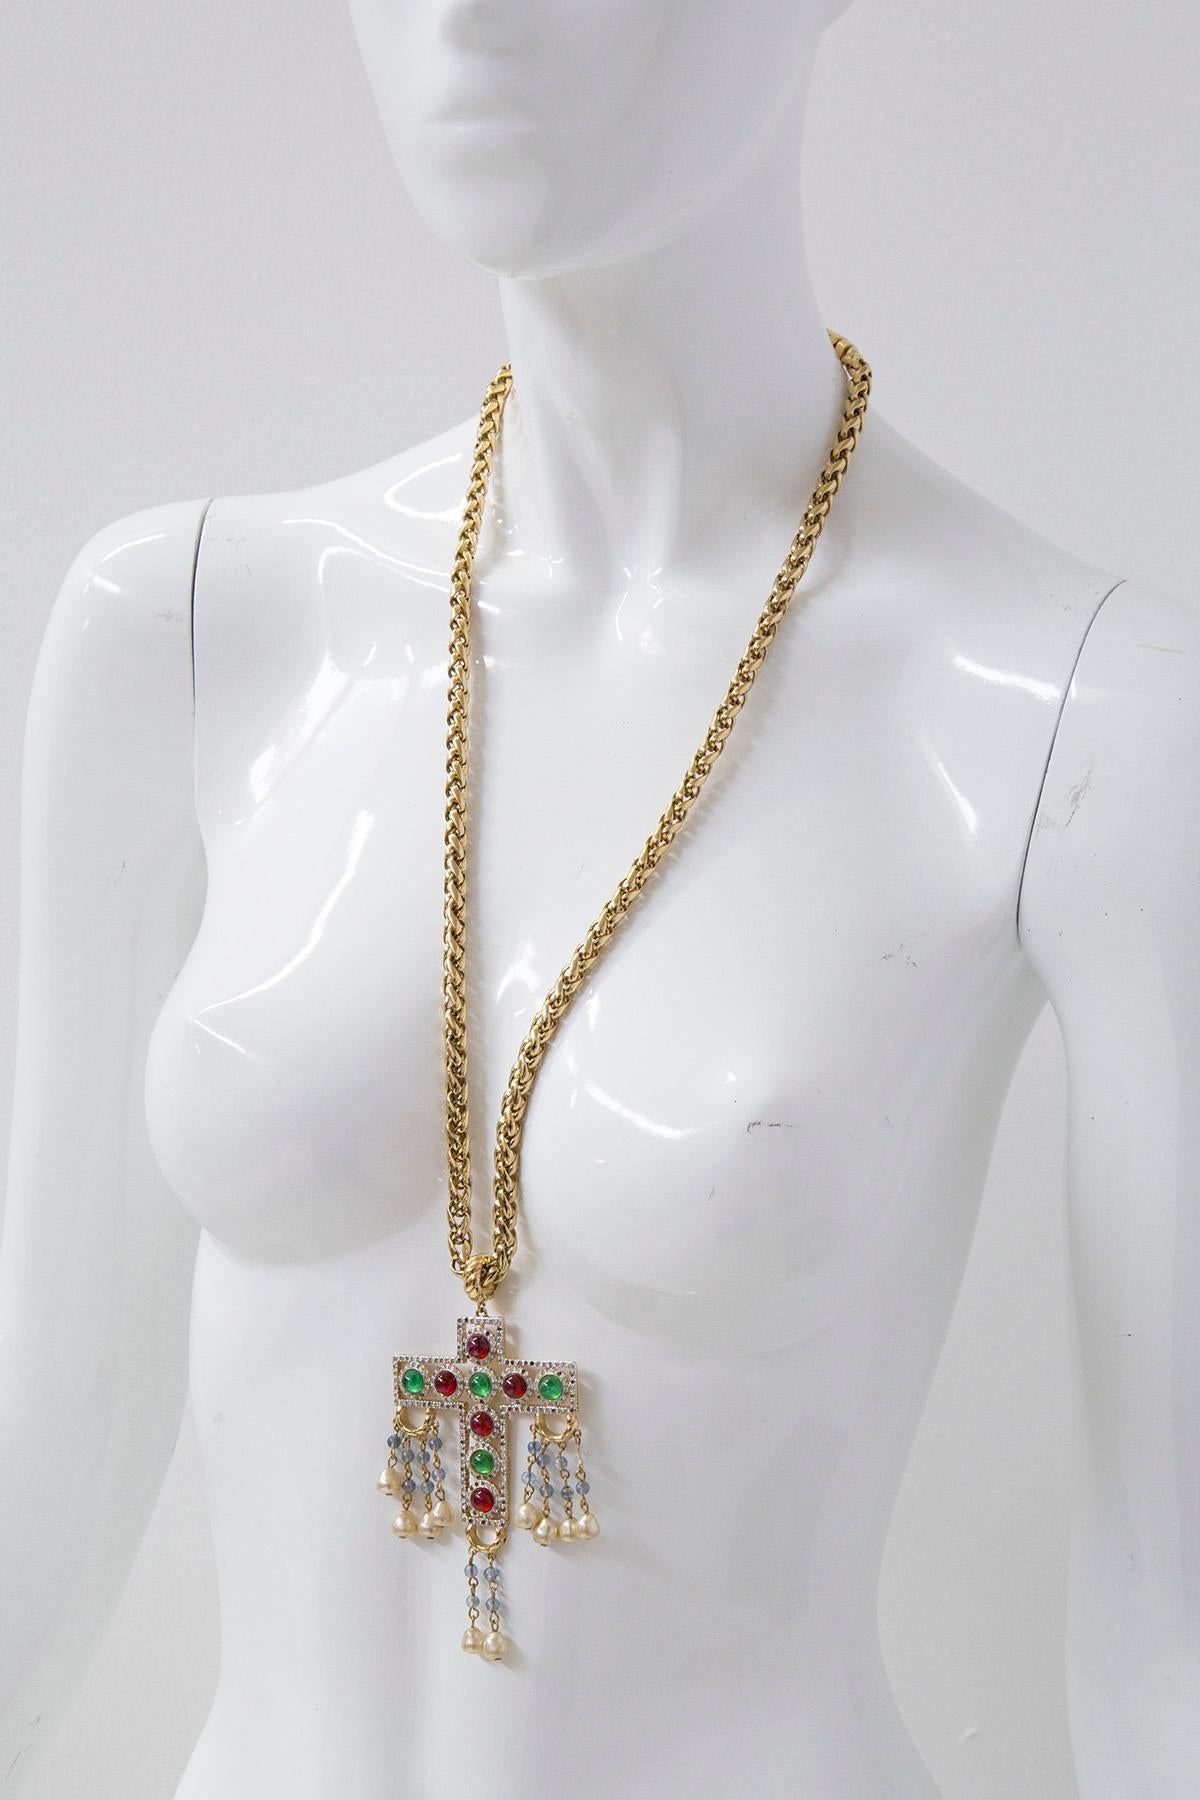 Eccentric chain necklace with Valentino cross branded on the back. The chain has an intricate inlaid design with a clip fastening made of gold-plated metal.
The Chain features a pendant cross element, decorated with ruby and emerald effect